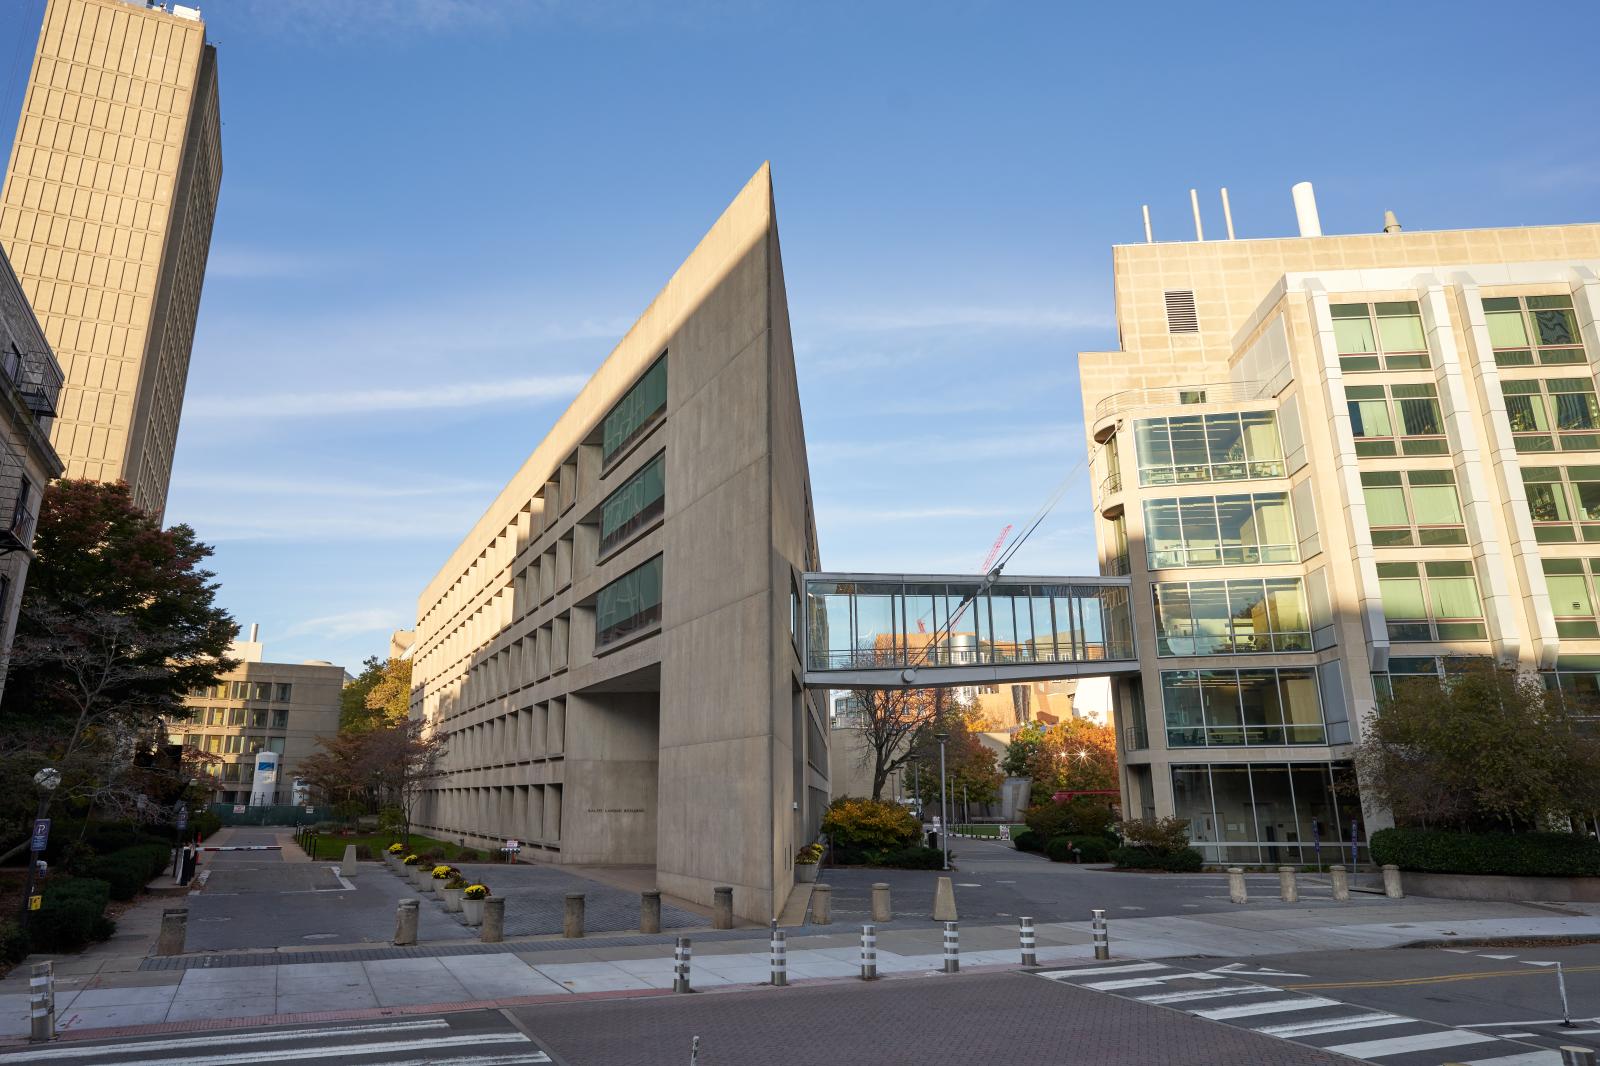 Overview of MIT / The Massachusetts Institute of Technology